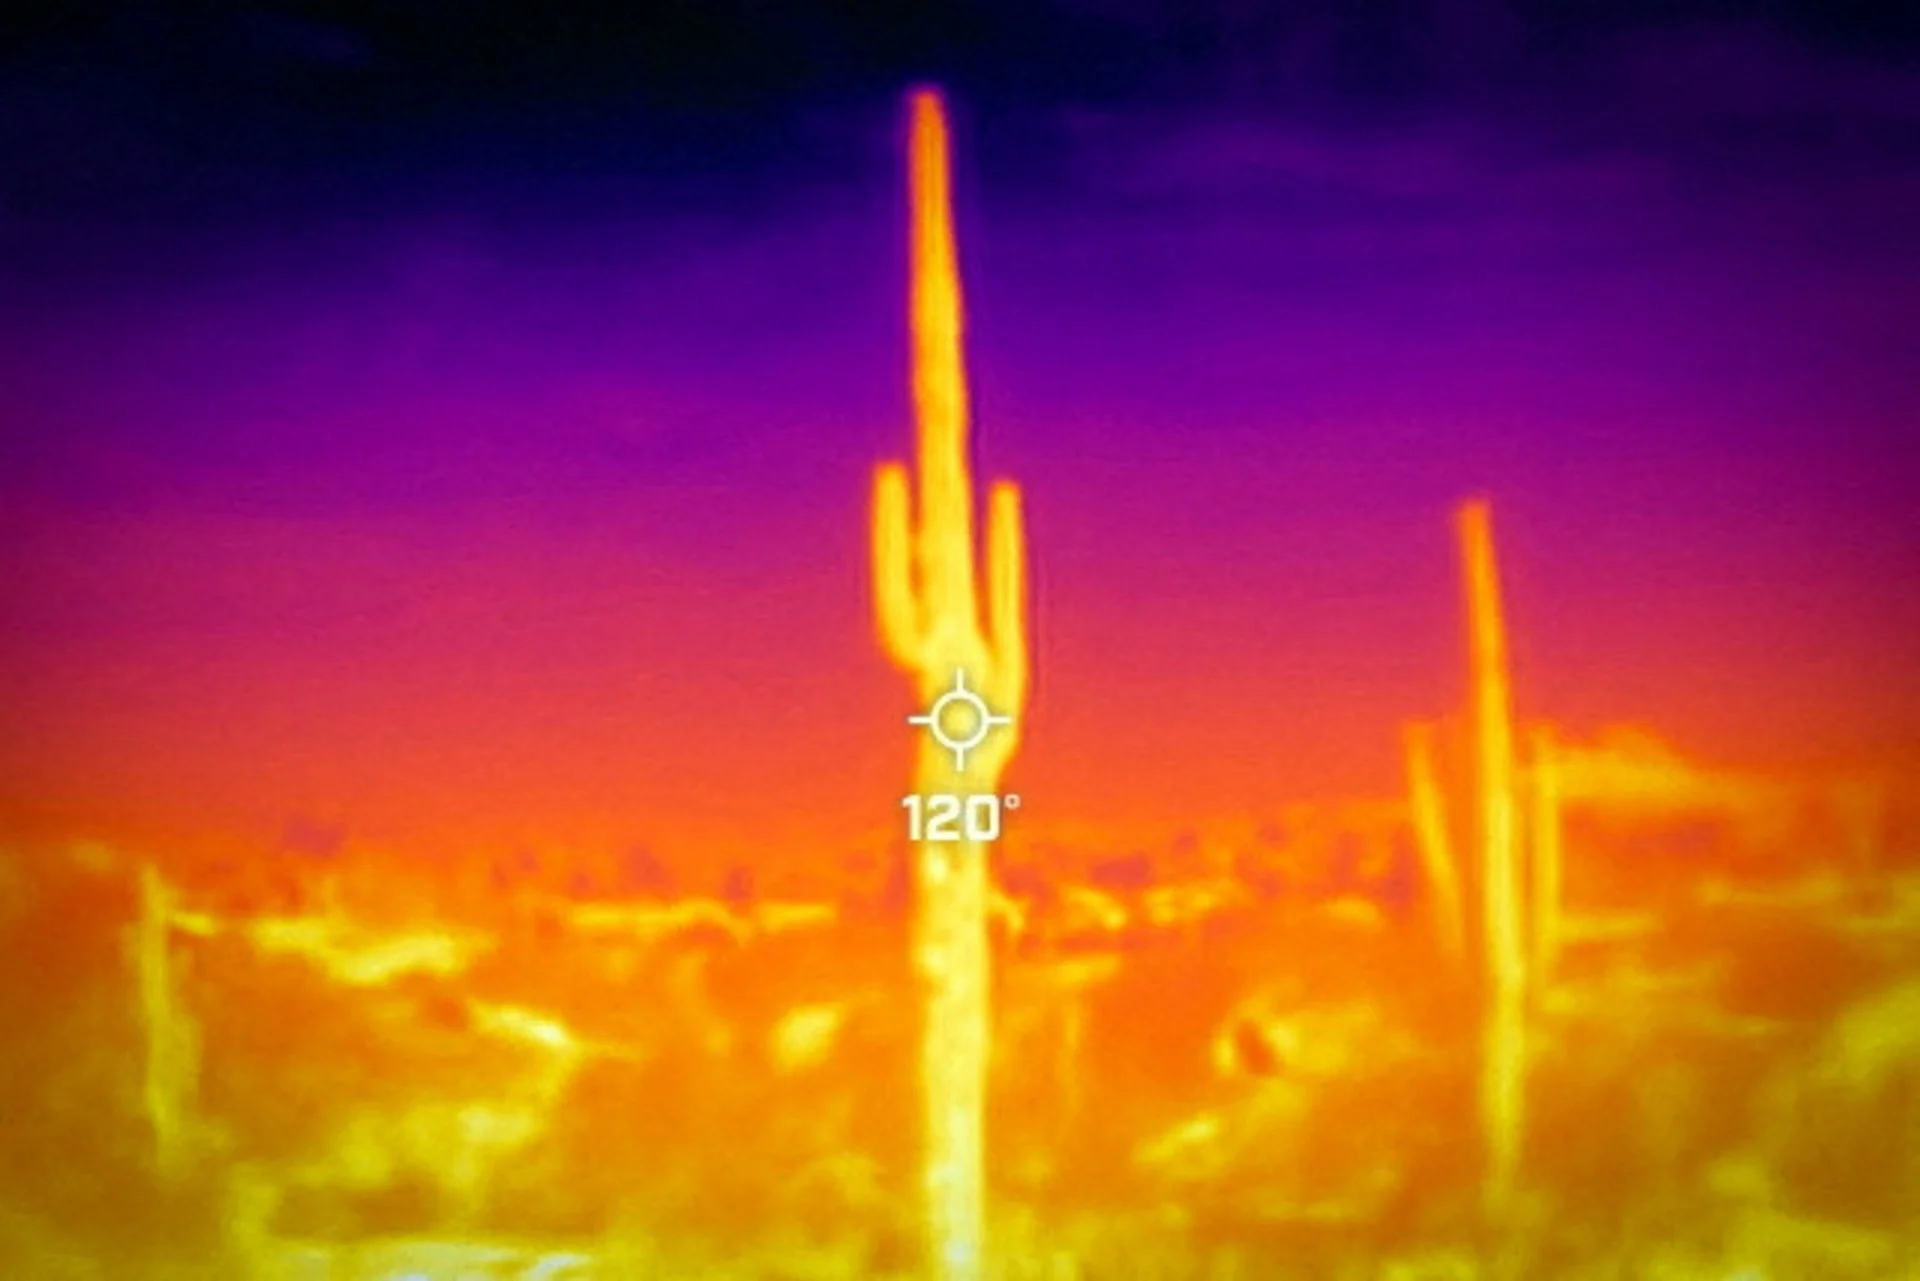 Reuters: FILE PHOTO: A saguaro cactus is seen during a 27-day-long heat wave with temperatures over 110 degrees Fahrenheit (43 degrees Celsius) at the Desert Botanical Garden in Phoenix, Arizona, U.S., July 26, 2023. On July 26 at 09:50 (GMT-7), a Flir One ProThermal camera registered a surface temperature of 120 degrees Fahrenheit (48 degrees Celsius), with an air temperature of 86 degrees Fahrenheit (30 degrees Celsius) according to the National Weather Service. REUTERS/Carlos Barria/File Photo